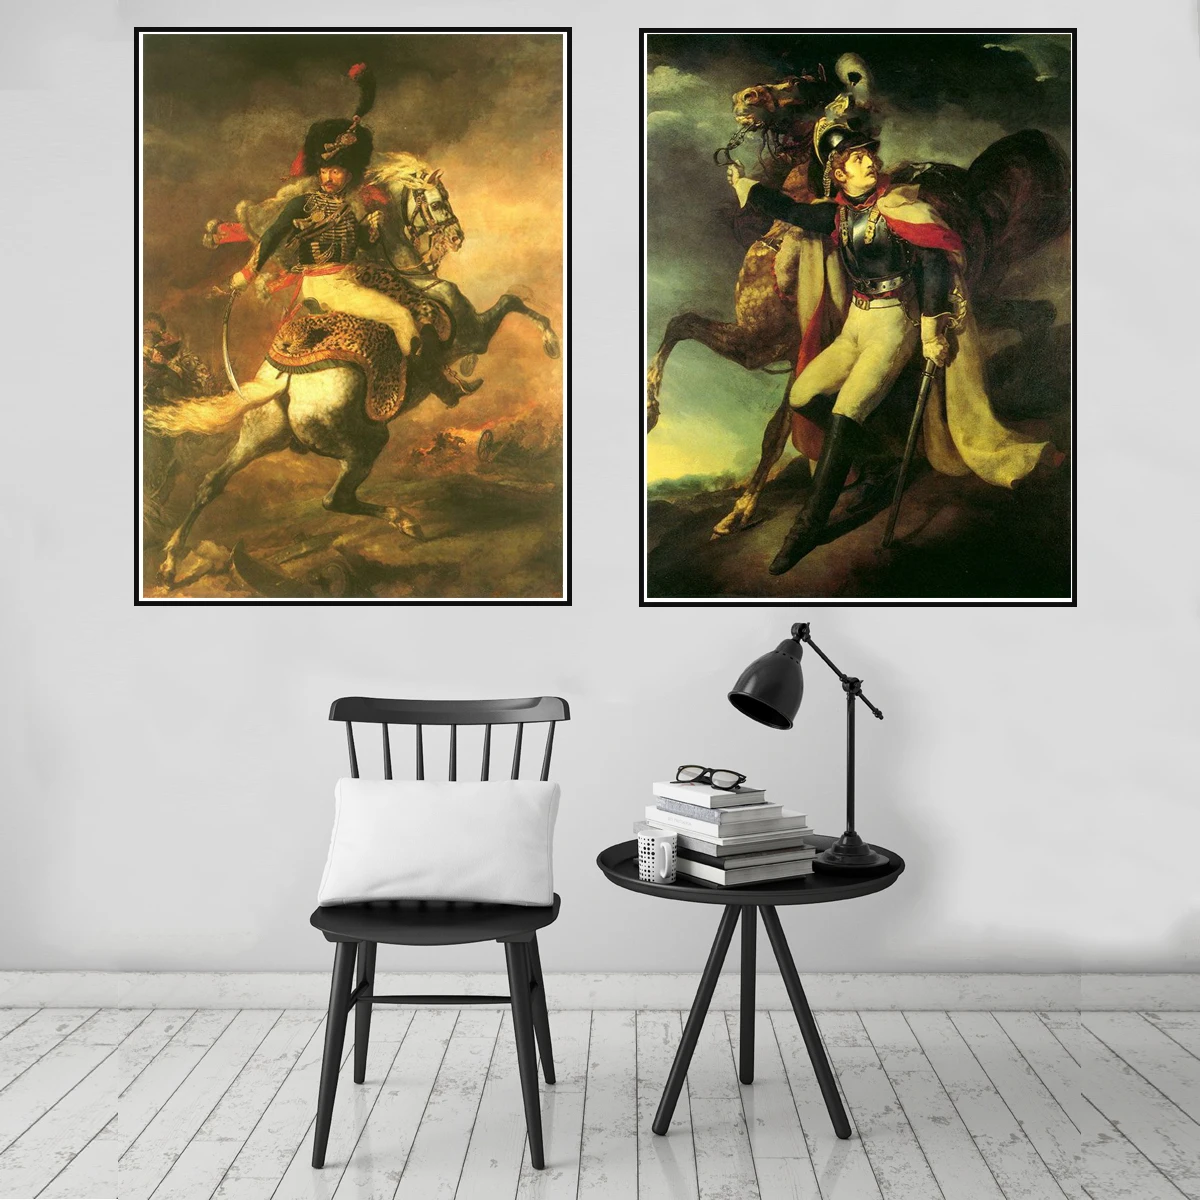 Vintage Middle Ages Art Canvas Poster Oil Painting Picture Wall Home Decor Gift